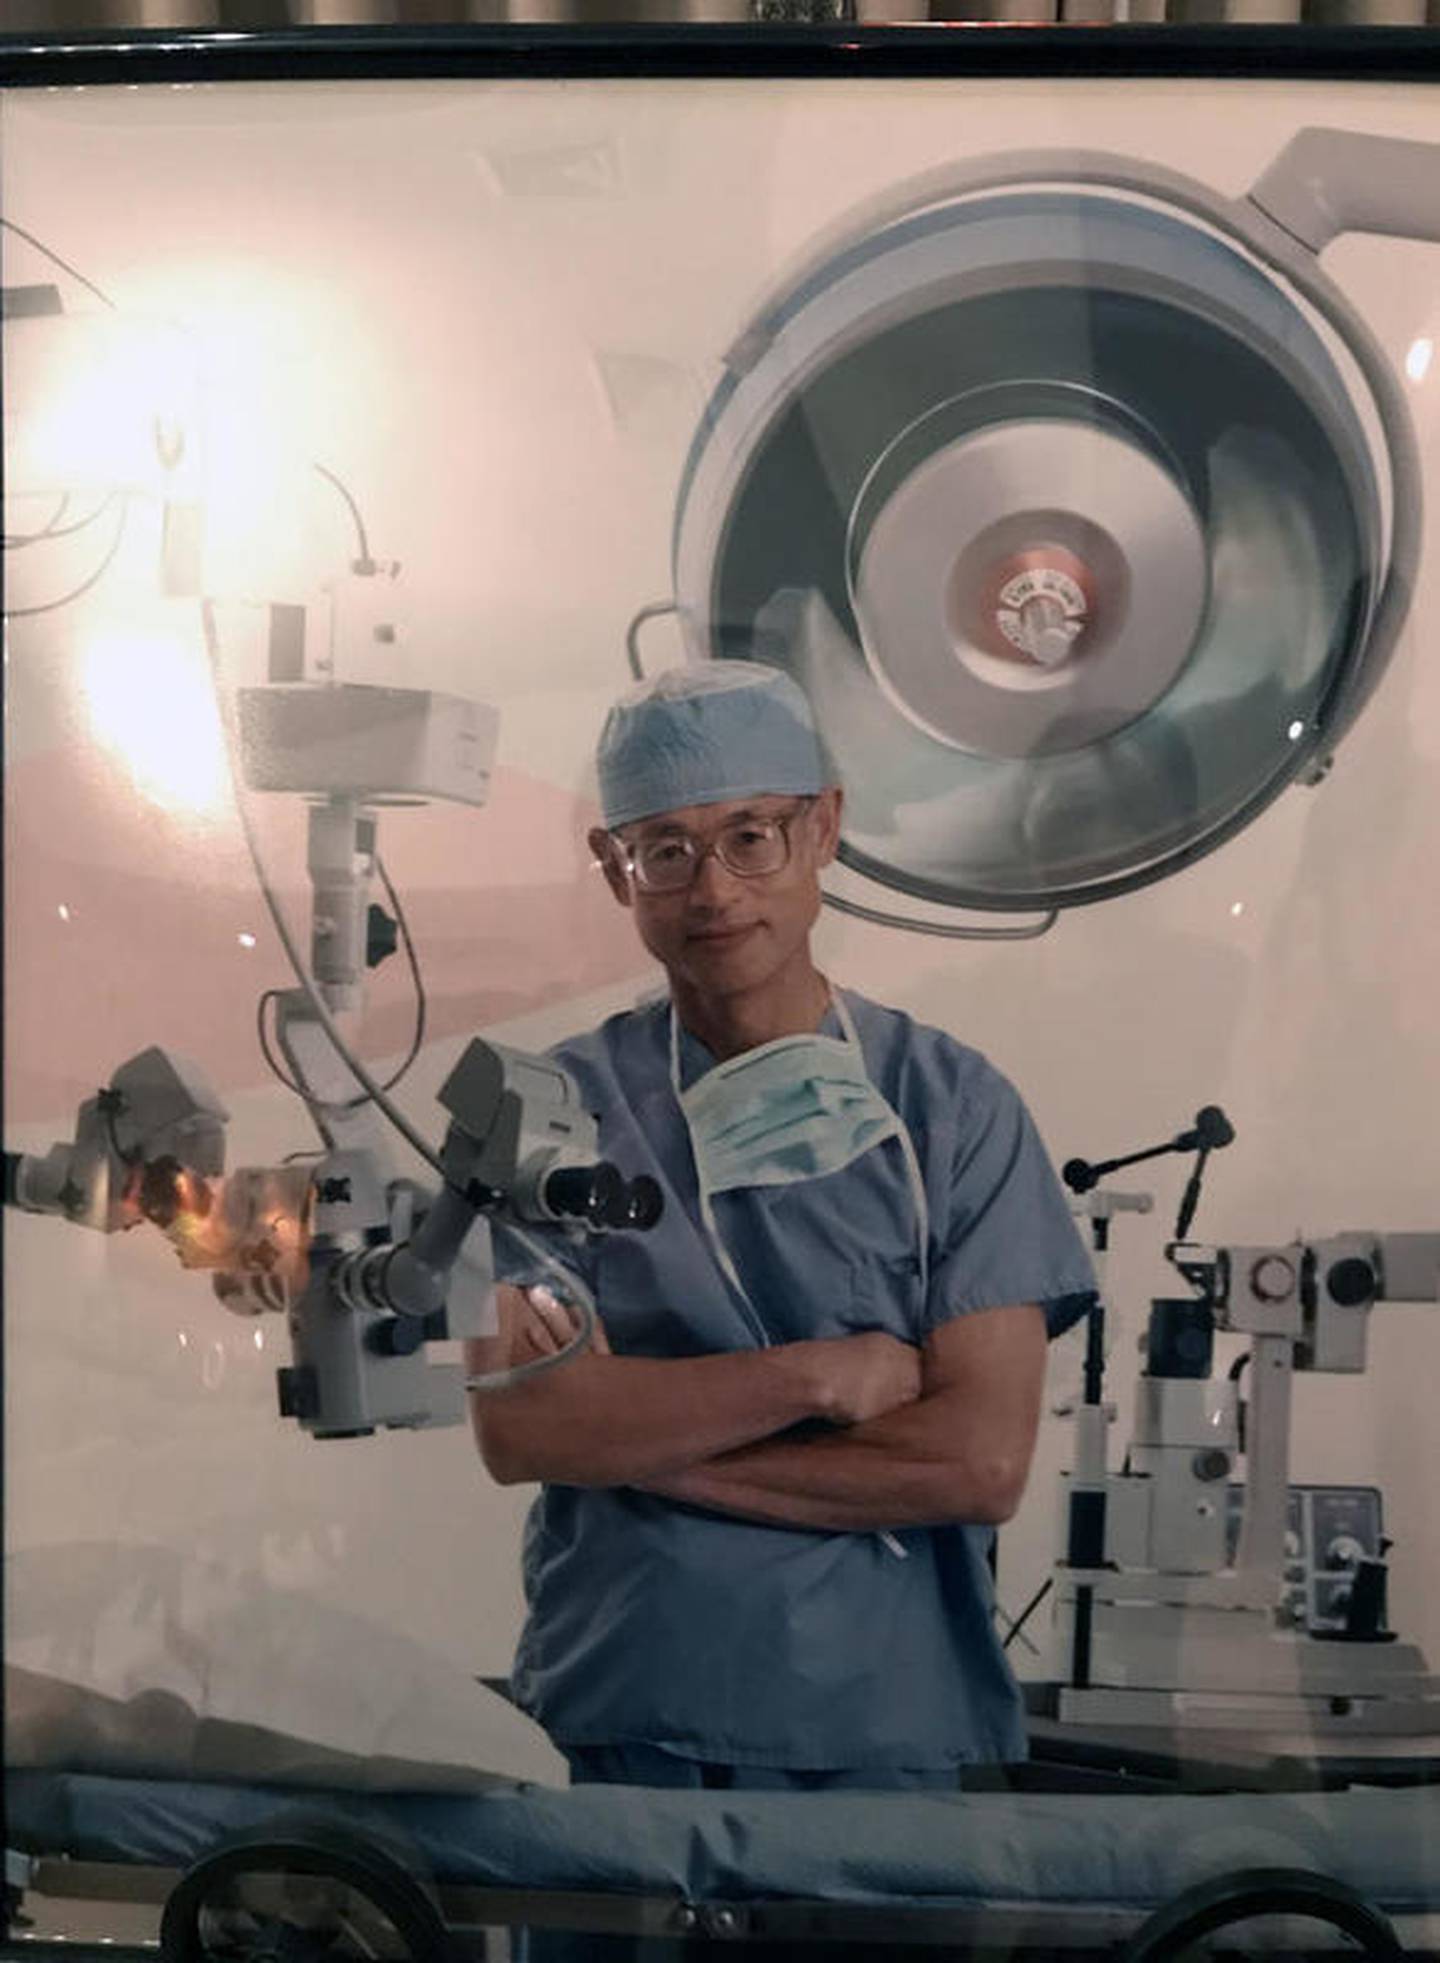 Joliet ophthalmologist Dr. Paul Morimoto performed microsurgery, started a diabetes screening program in the community and handled patient emergencies whenever they occurred.